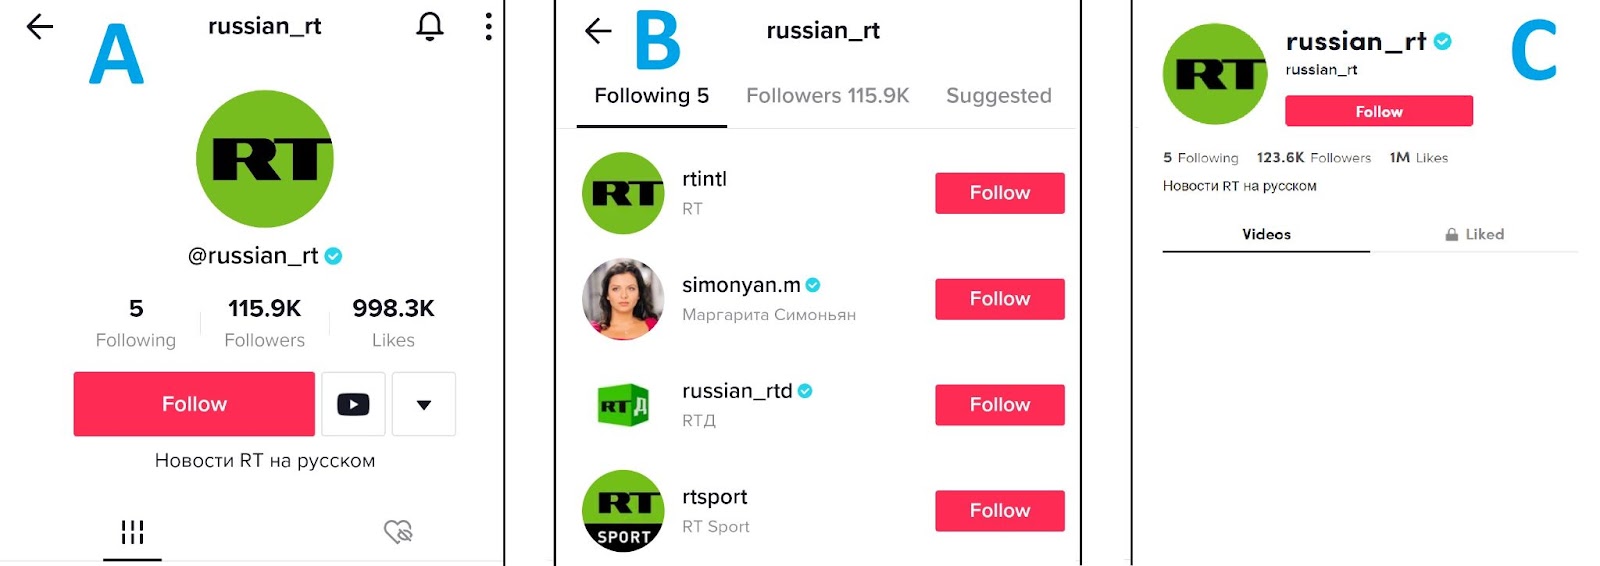 Three images of RT’s Russian-language TikTok account on mobile and the web browser show the extra features available via the app, including a link to RT's YouTube account and follower lists.